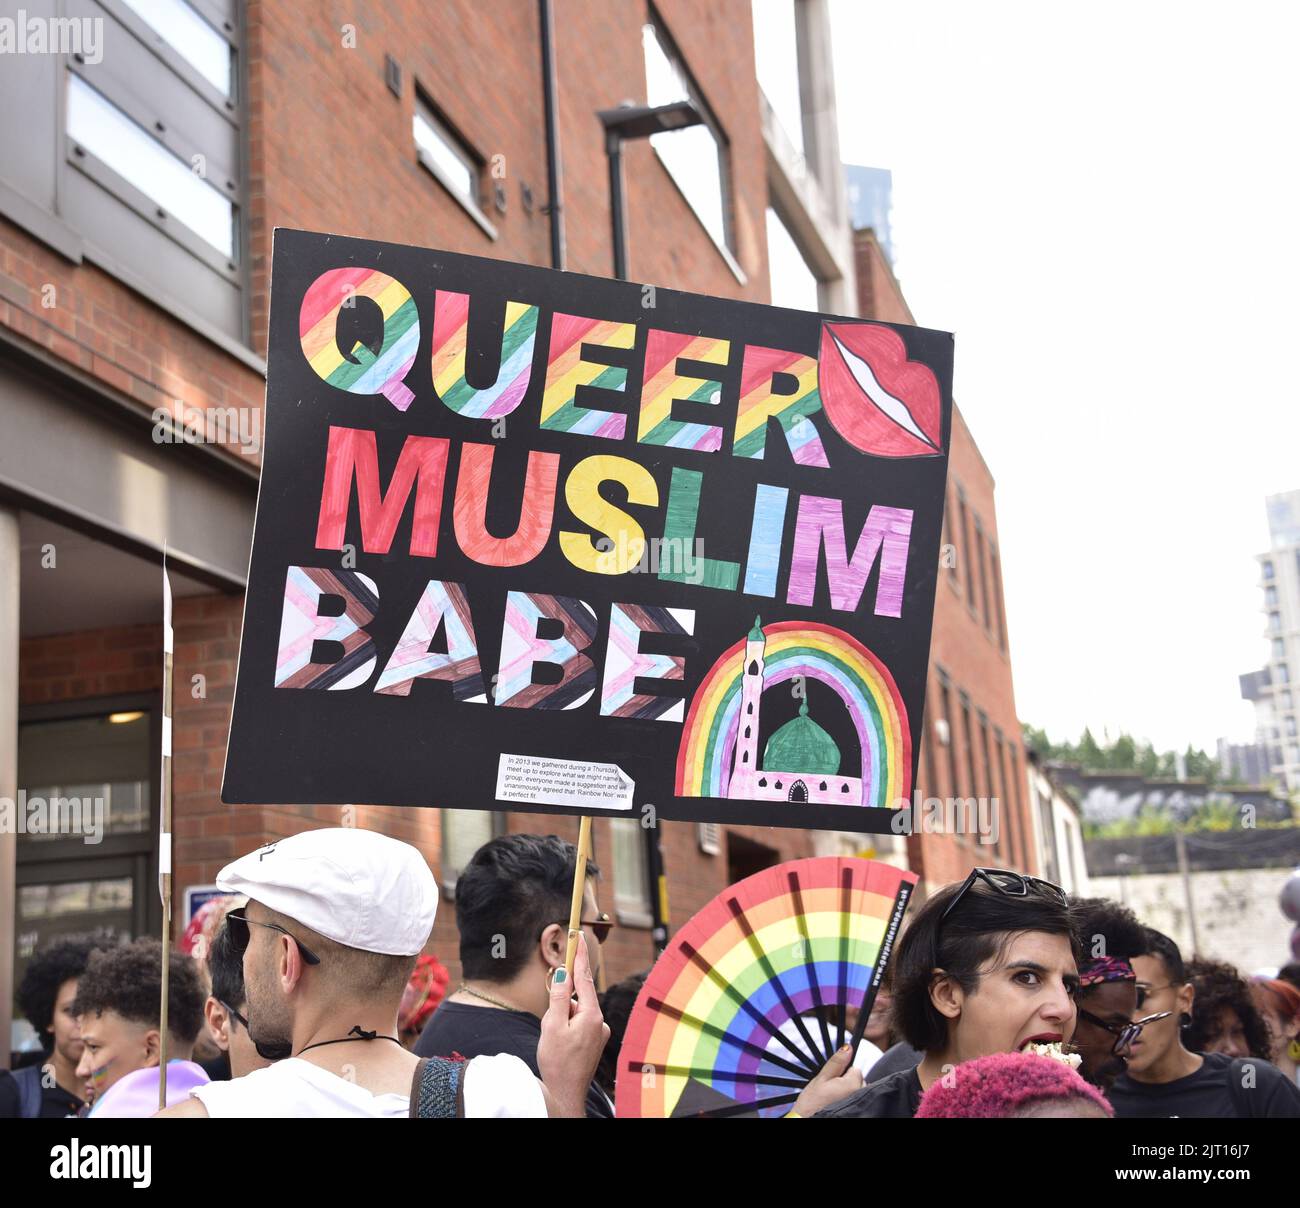 Manchester, UK. 27th August, 2022. Group with 'Queer Muslim' placard. Participants get ready to take part in the LGBTQ+ Pride parade, central Manchester, UK, as LGBTQ+ Pride continues over the Bank Holiday weekend 26th to 29th August. Organisers say: 'Manchester Pride is one of the UK's leading LGBTQ+ charities. Our vision is a world where LGBTQ+ people are free to live and love without prejudice. We’re part of a global Pride movement celebrating LGBTQ+ equality and challenging discrimination.' Credit: Terry Waller/Alamy Live News Stock Photo